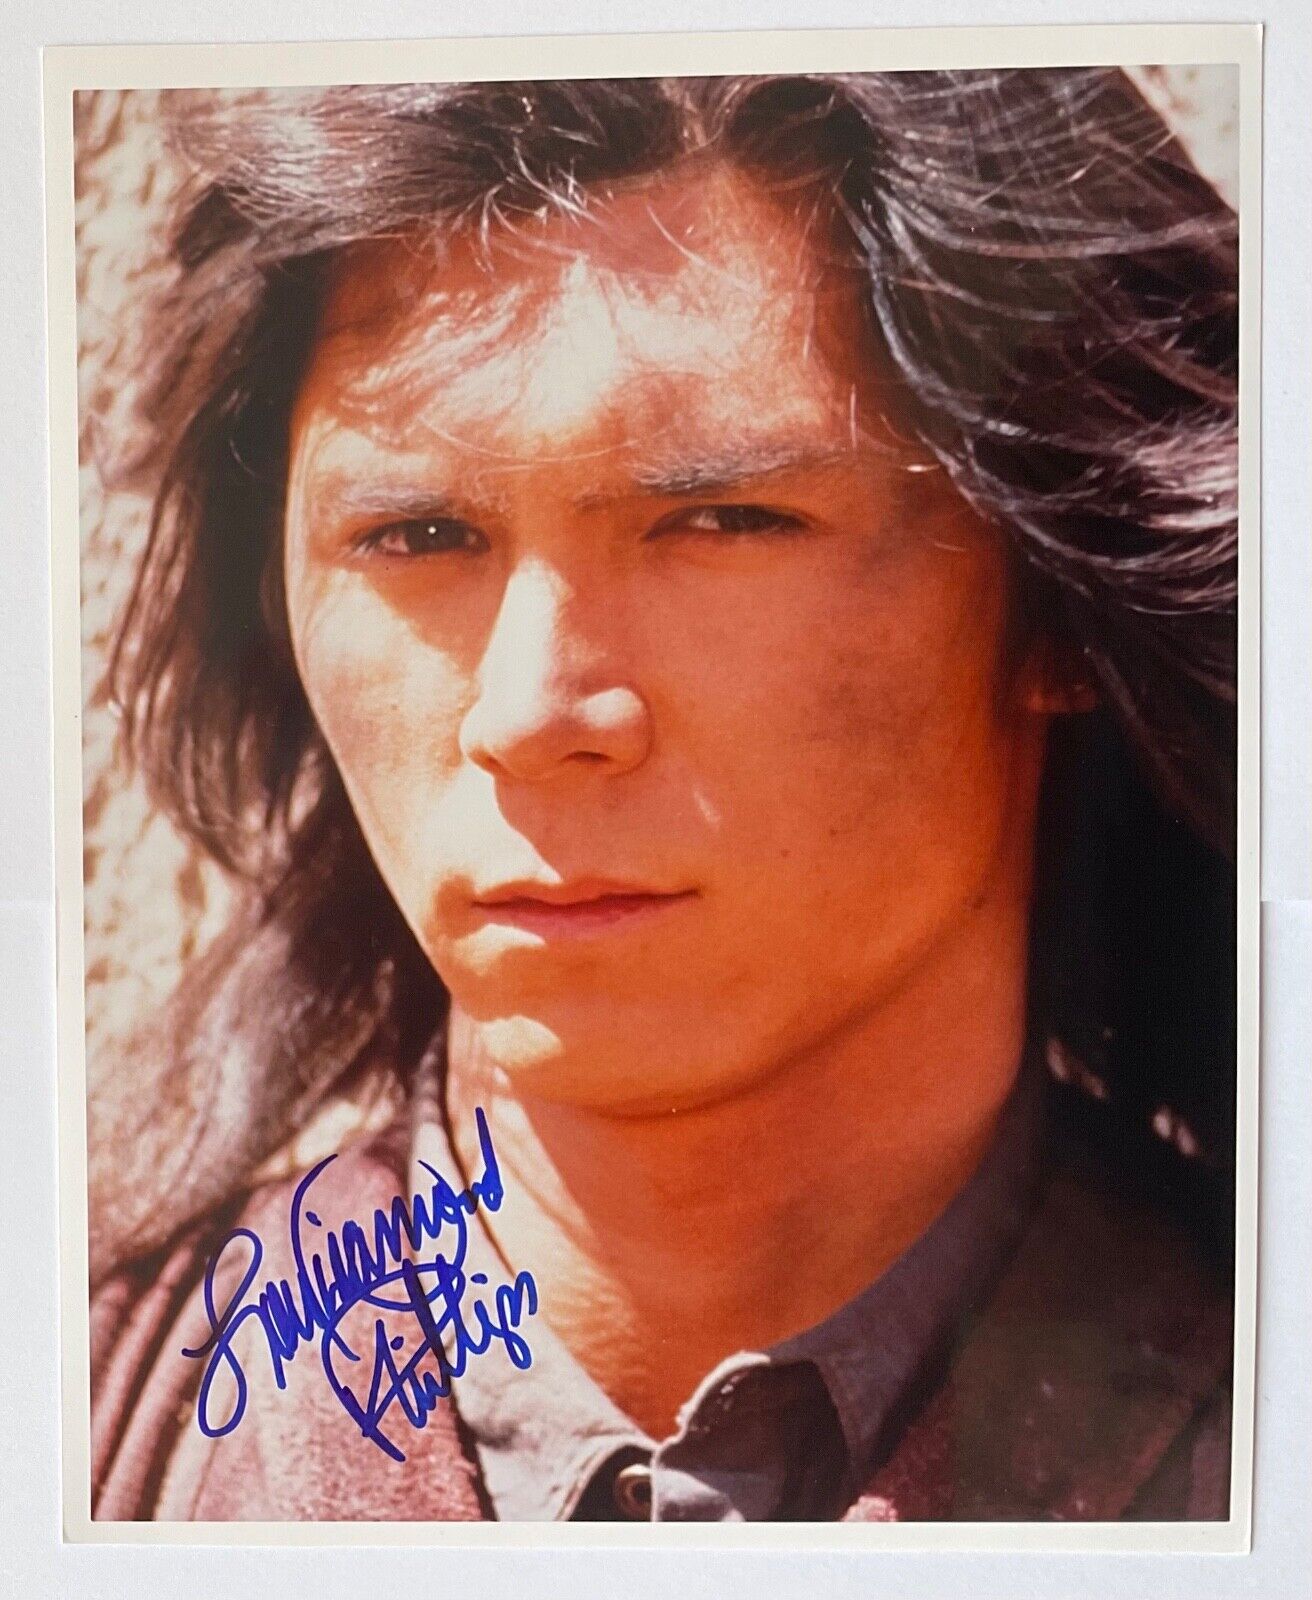 LOU DIAMOND PHILLIPS ( Young Guns ) Genuine Handsigned Photograph 10 x 8